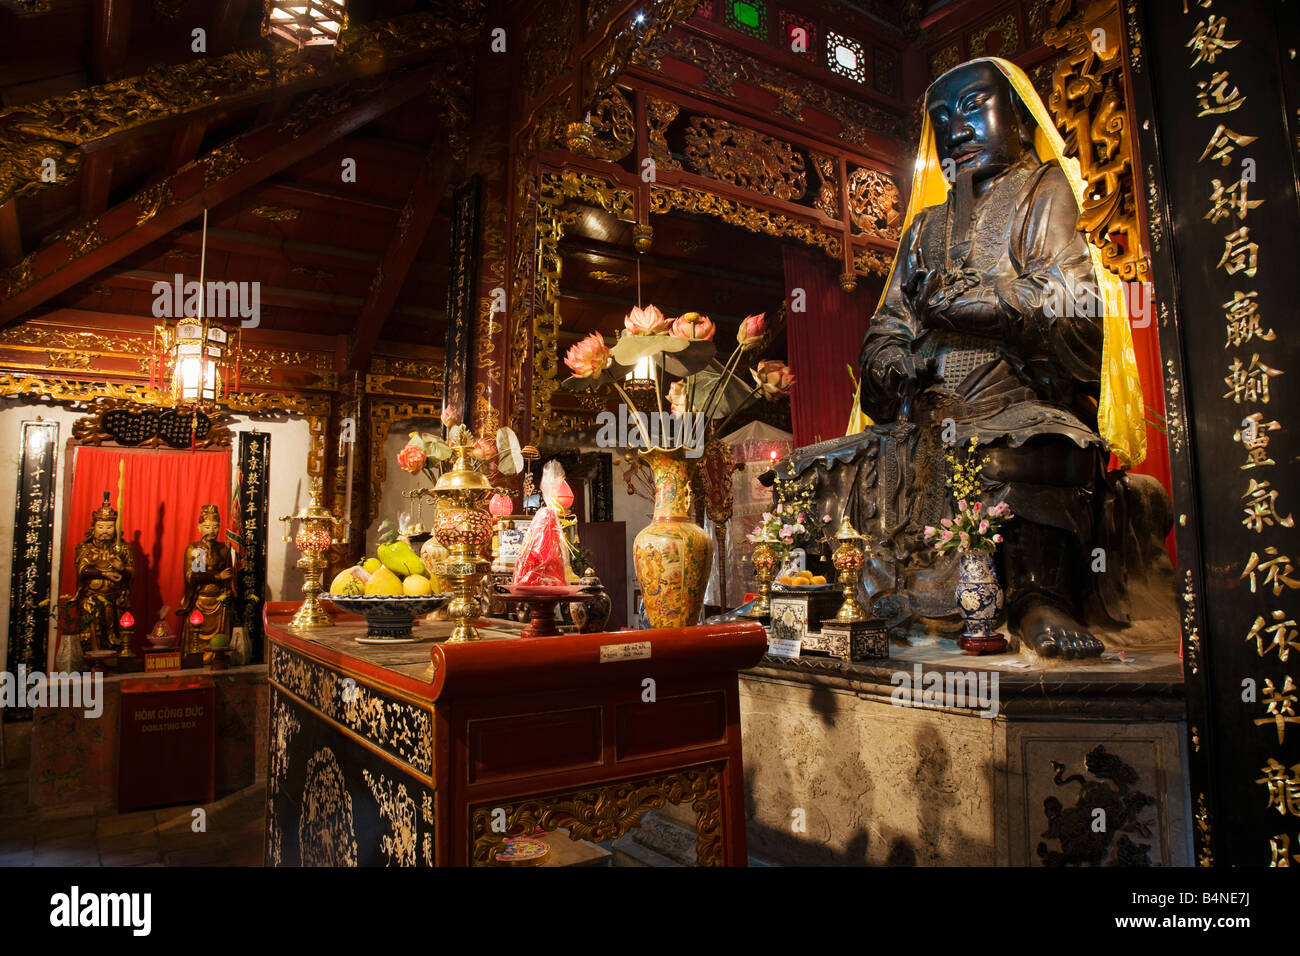 Quan Thanh Buddhist temple, built during the Ly dynasty (1010-1225); Hanoi, Vietnam Stock Photo